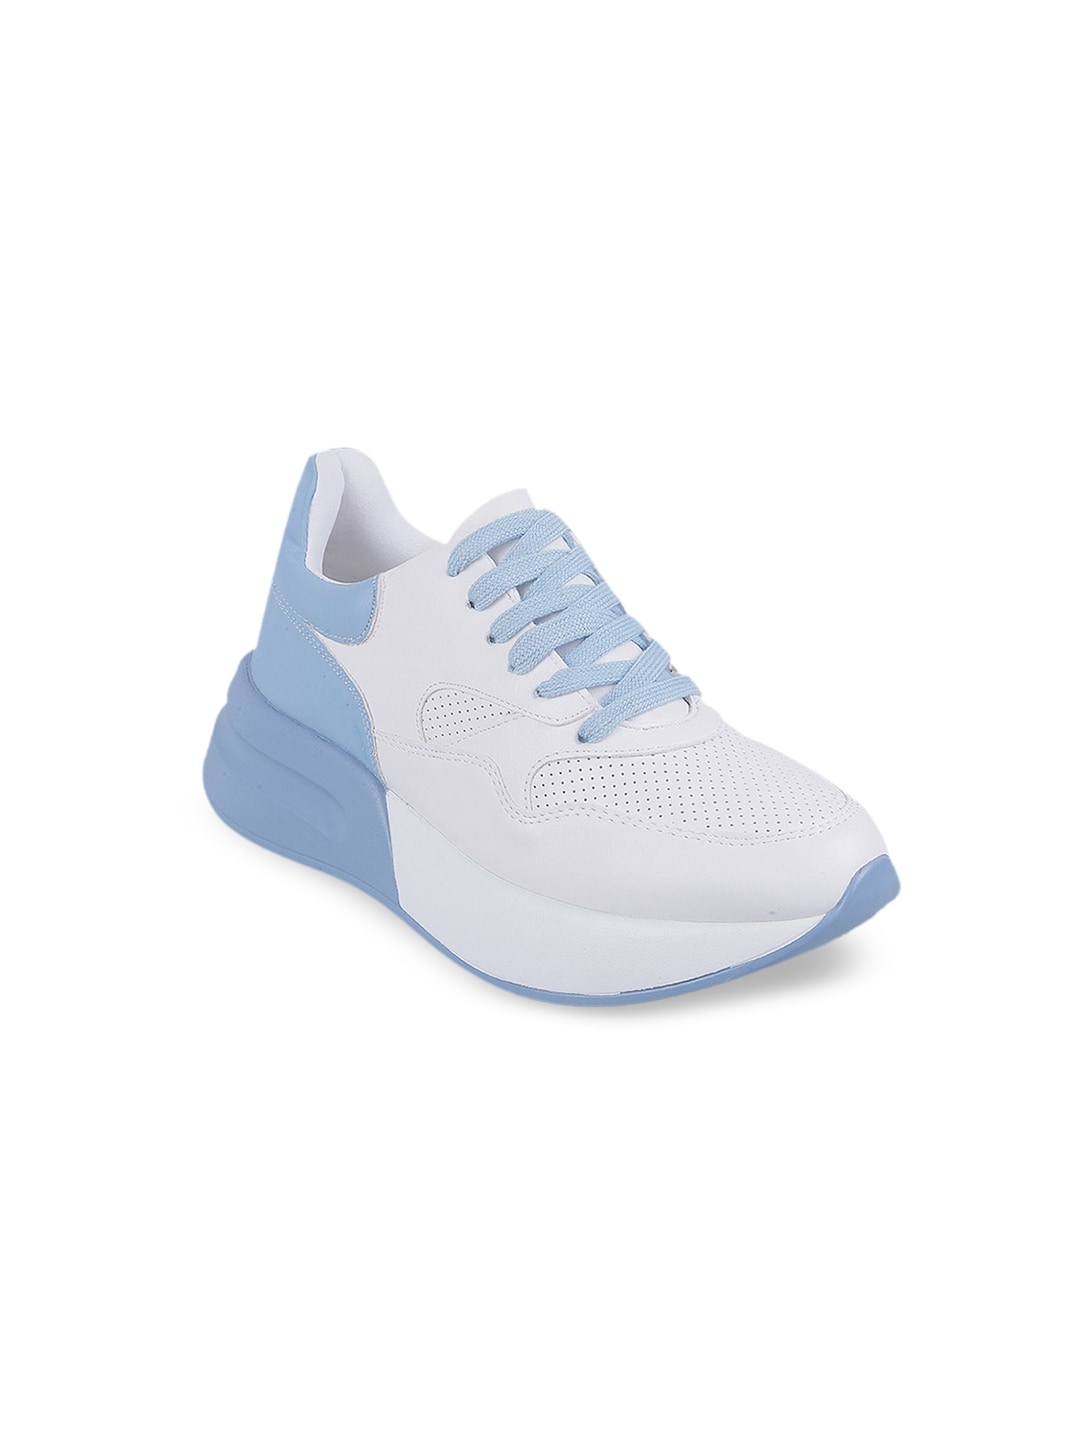 Mochi Women White & Blue Colourblocked Shoes Price in India